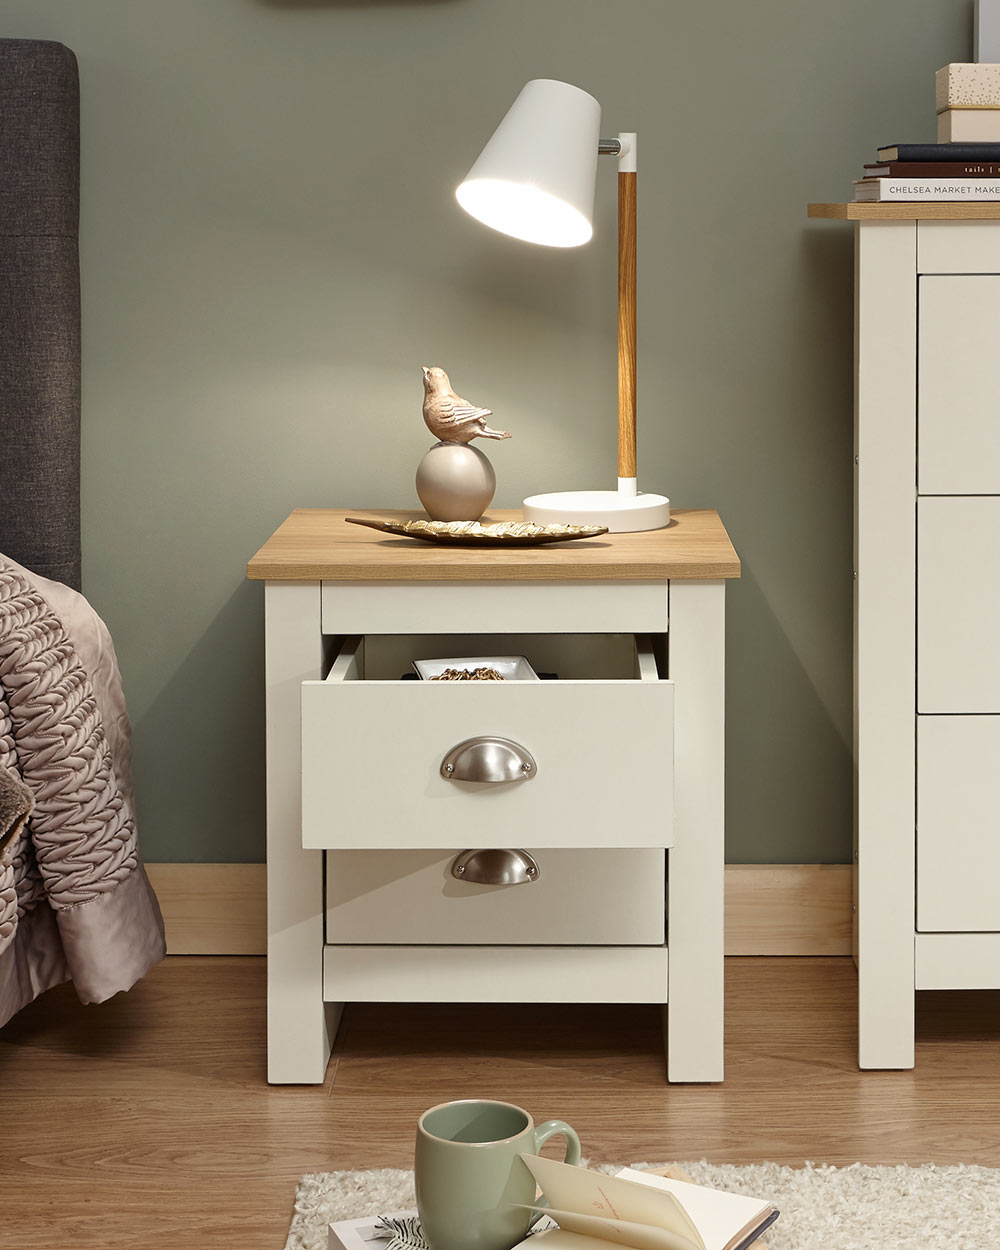 Lancaster bedside cabinet in cream with an oak effect top in a bedroom lifestyle setting with a lamp and decorative accessories on top with the top drawer open